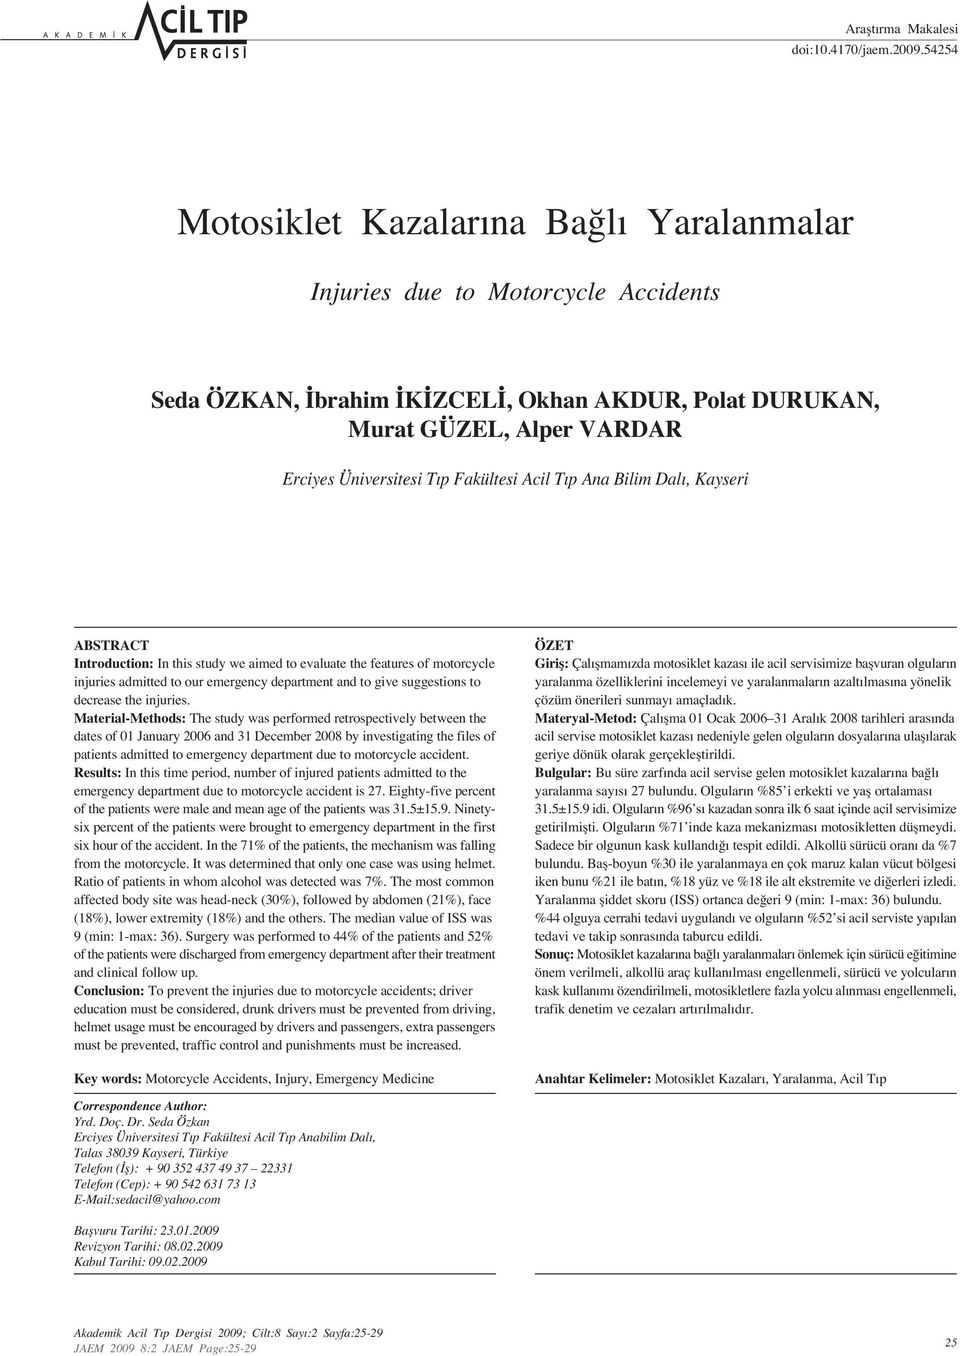 Acil T p Ana Bilim Dal, Kayseri ABSTRACT Introduction: In this study we aimed to evaluate the features of motorcycle injuries admitted to our emergency department and to give suggestions to decrease